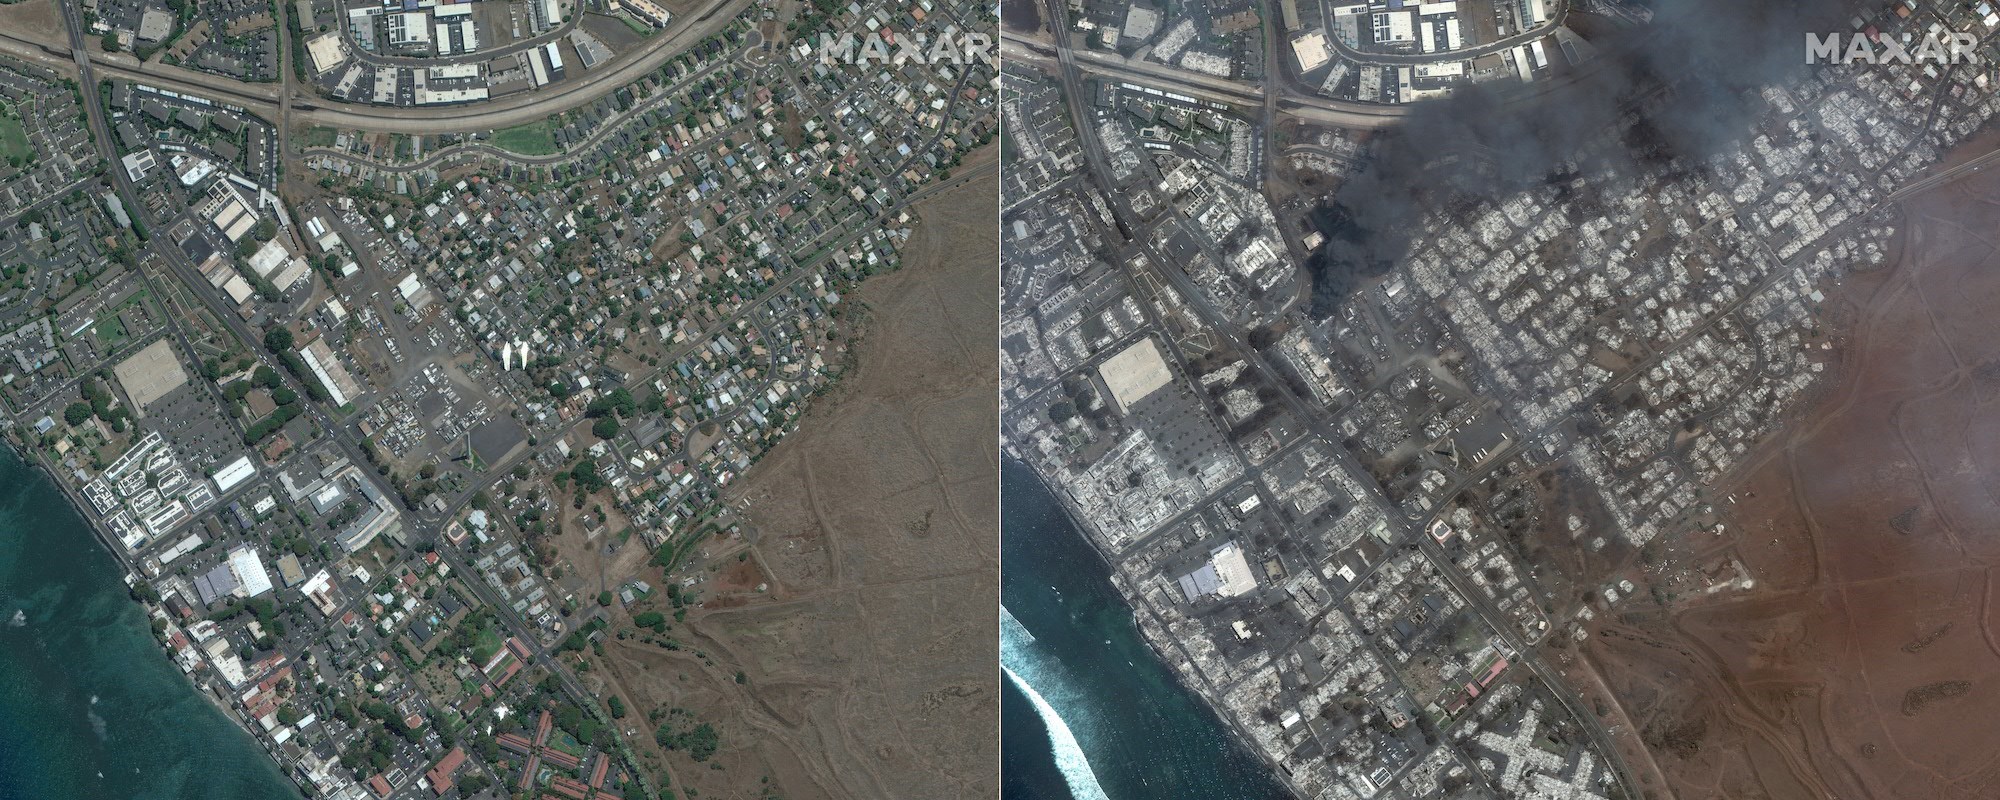 Real estate: Stunning before-and-after video The raging fires in Hawaii cause massive damage